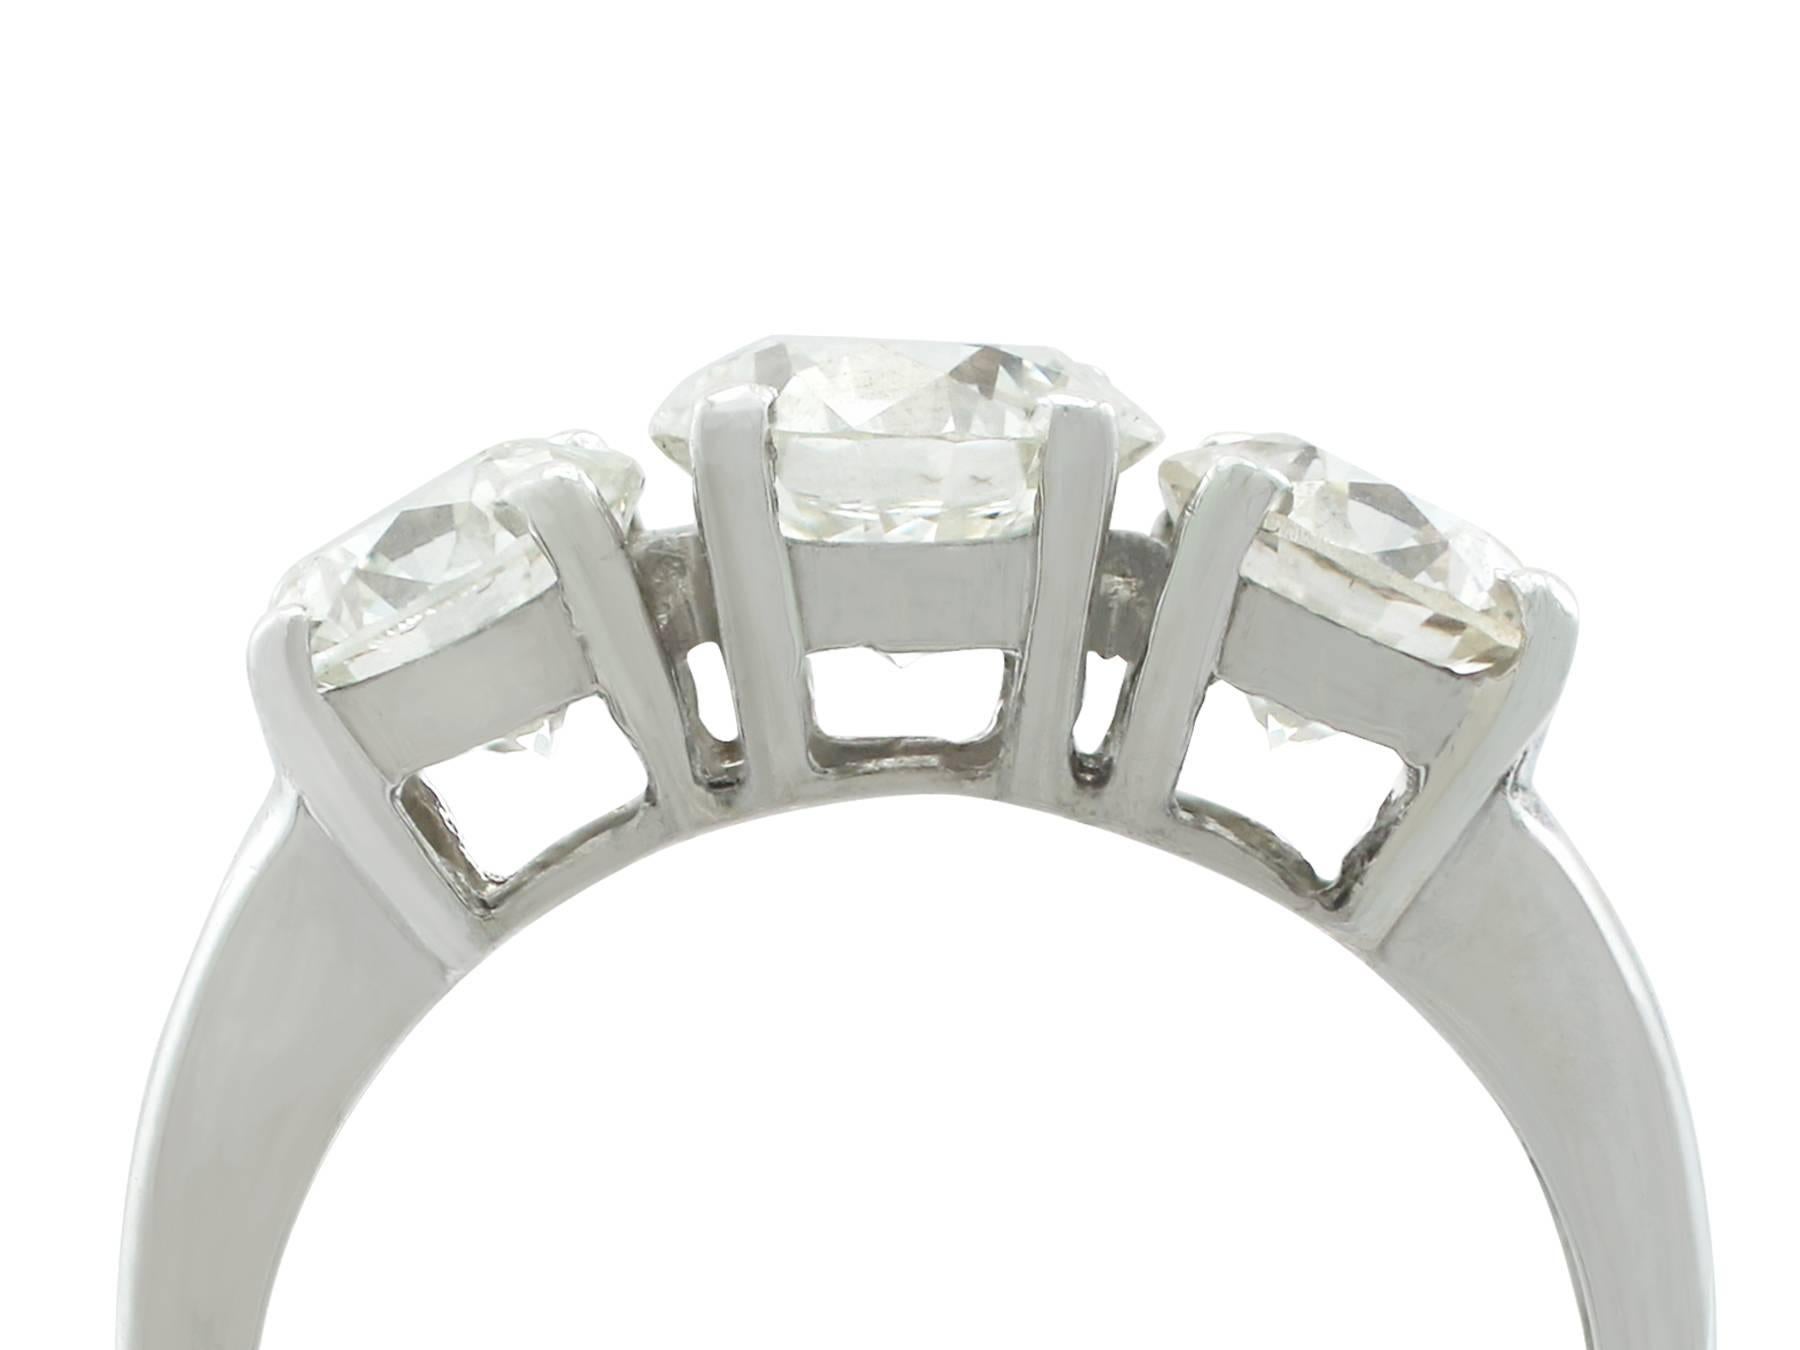 A stunning, fine and impressive 2.76 carat diamond (total) and 18 karat white gold trilogy ring; part of our diverse vintage jewelry and estate jewelry collections

This stunning, fine and impressive diamond trilogy ring has been crafted in 18k